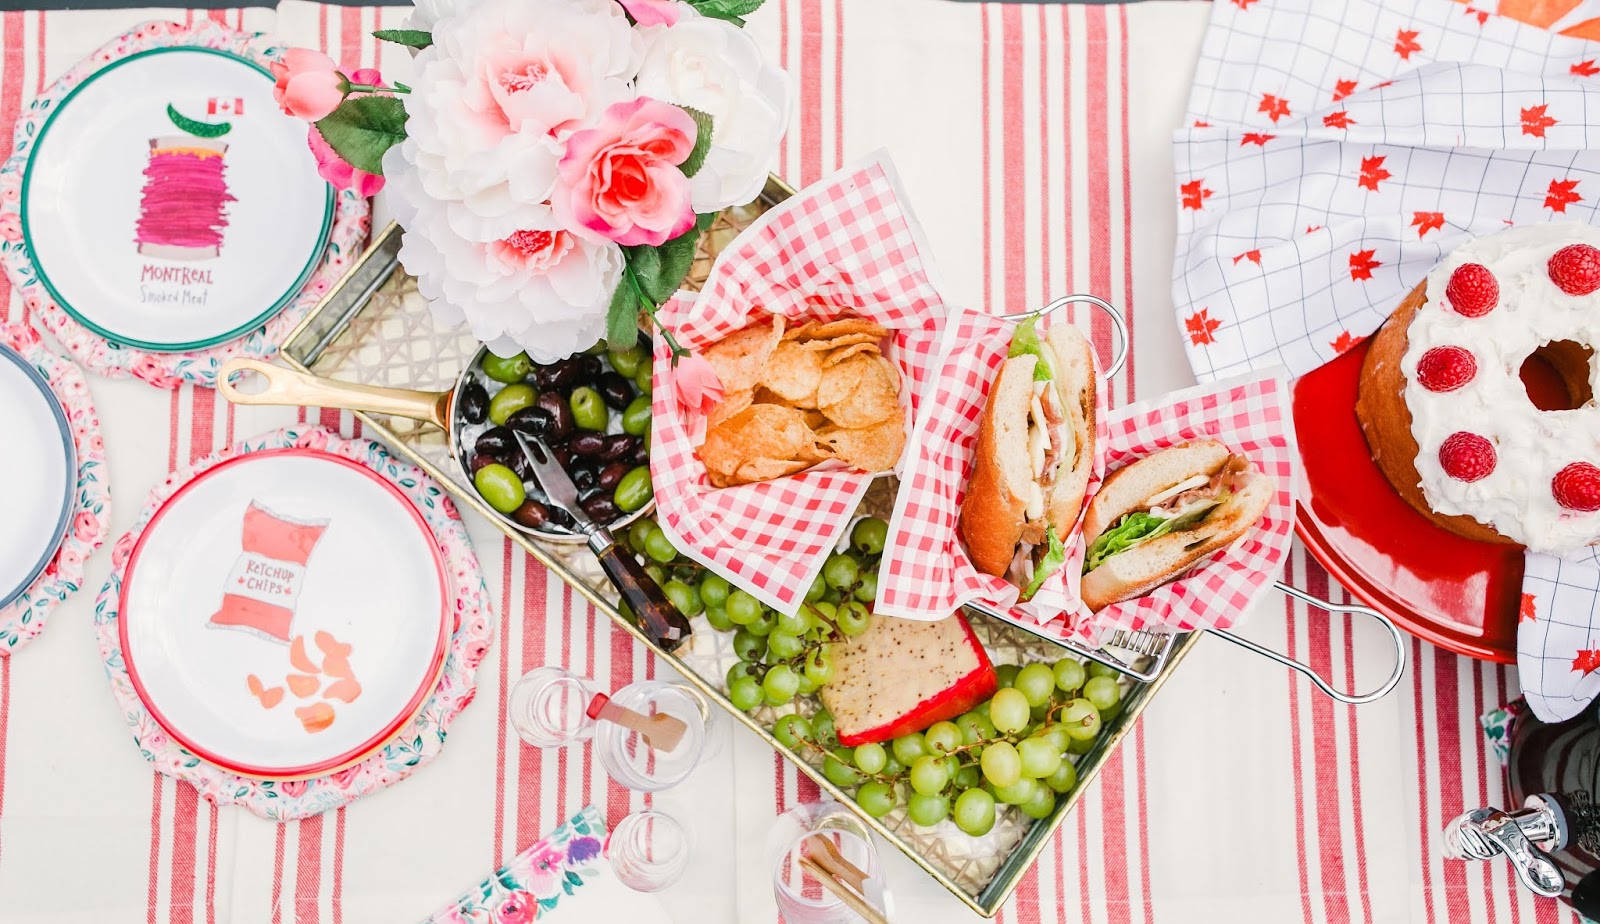 Bijuleni - How to Throw a Stylish Canada Day Summer Party 